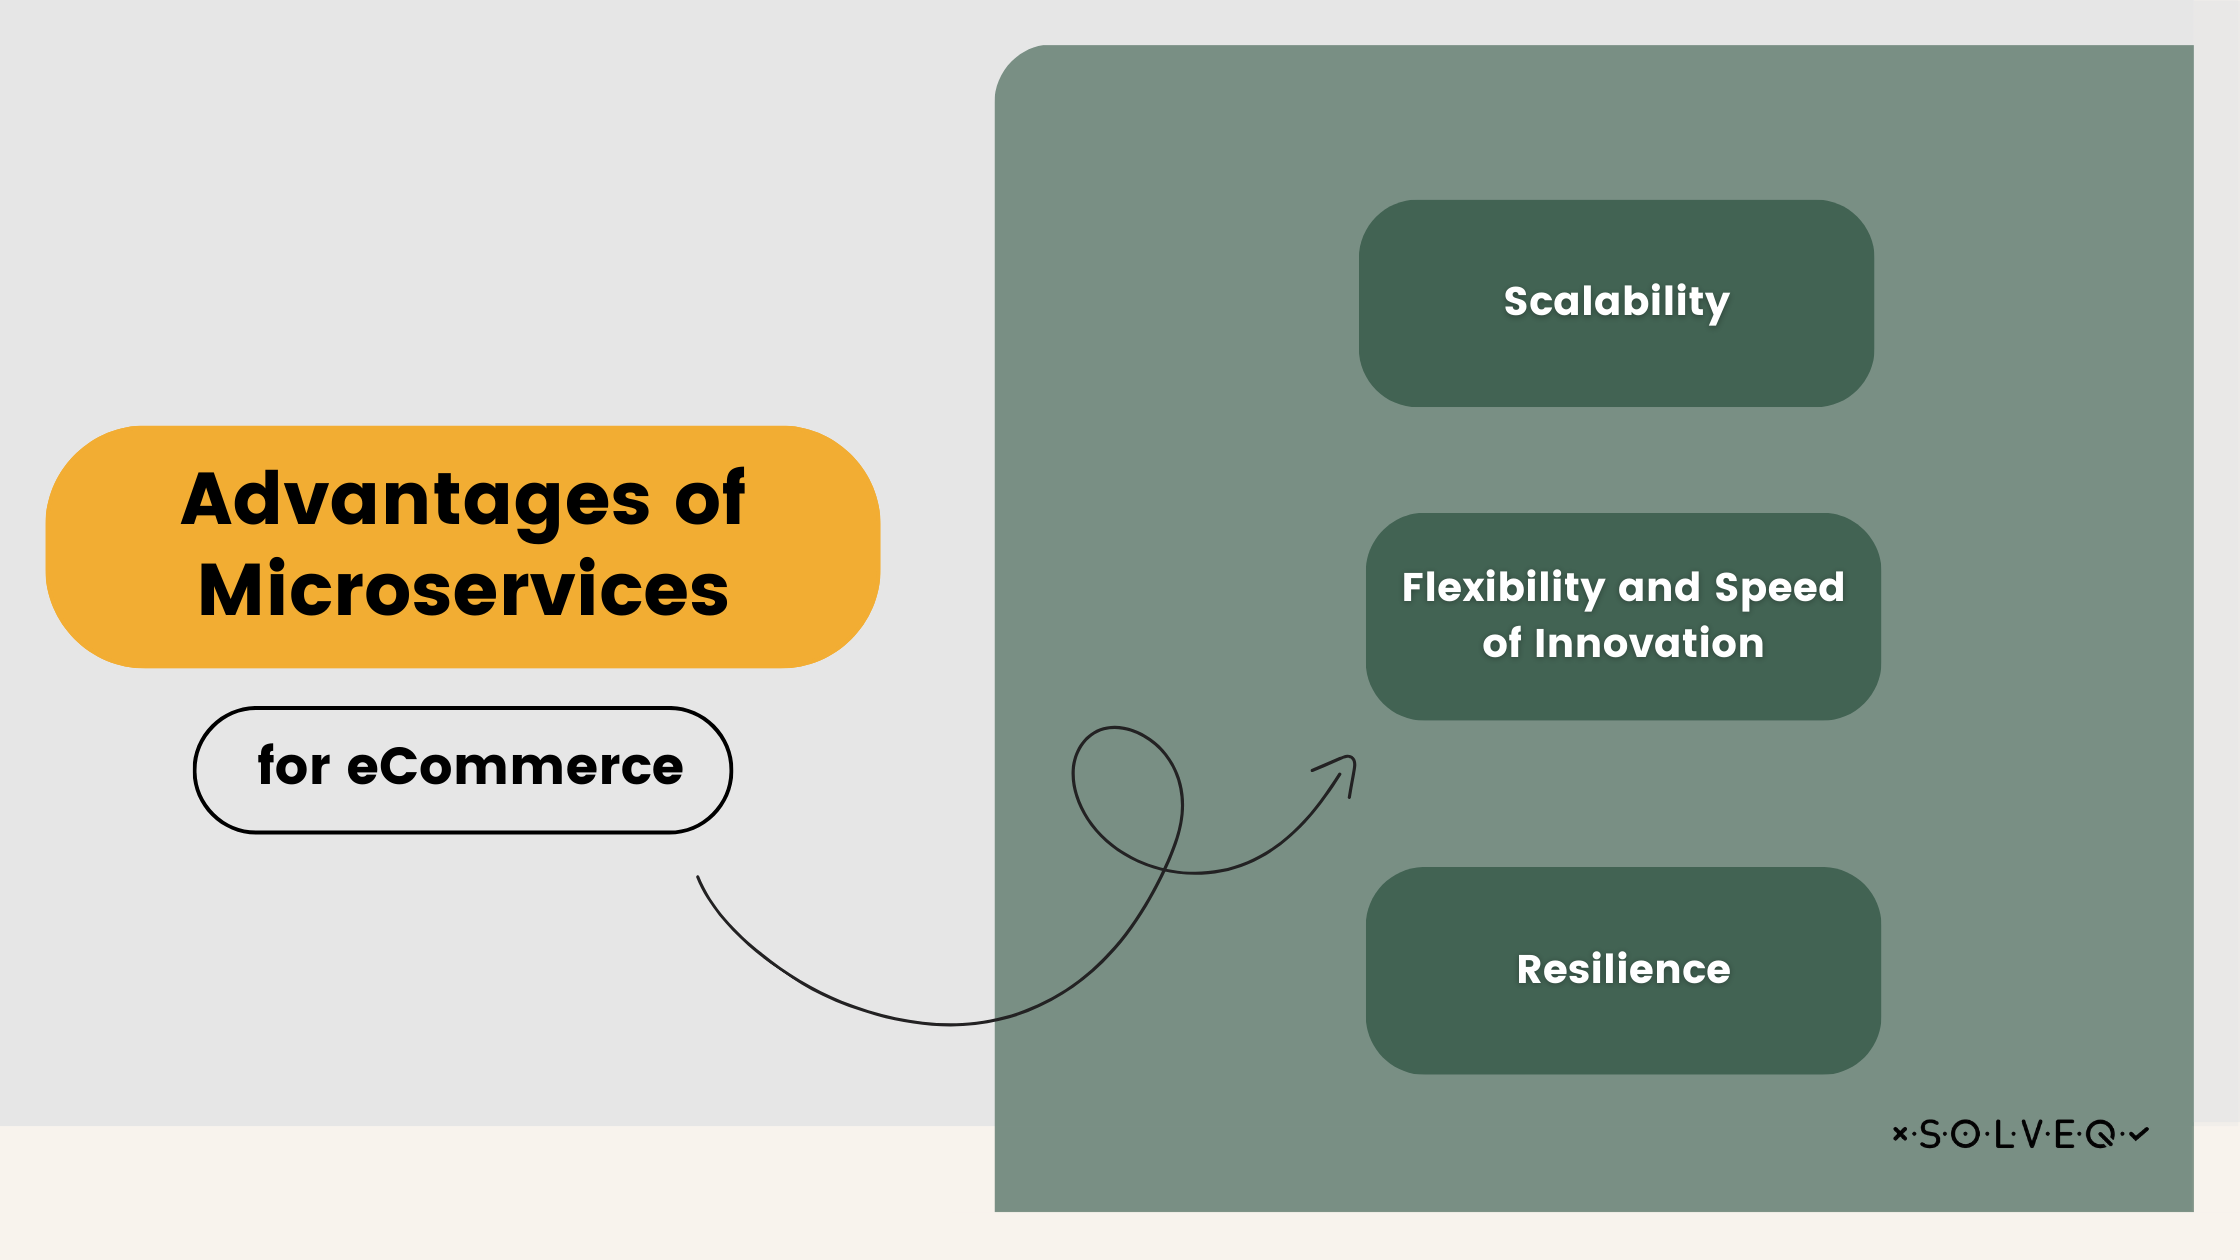 Adventages of microservices for eCommerce